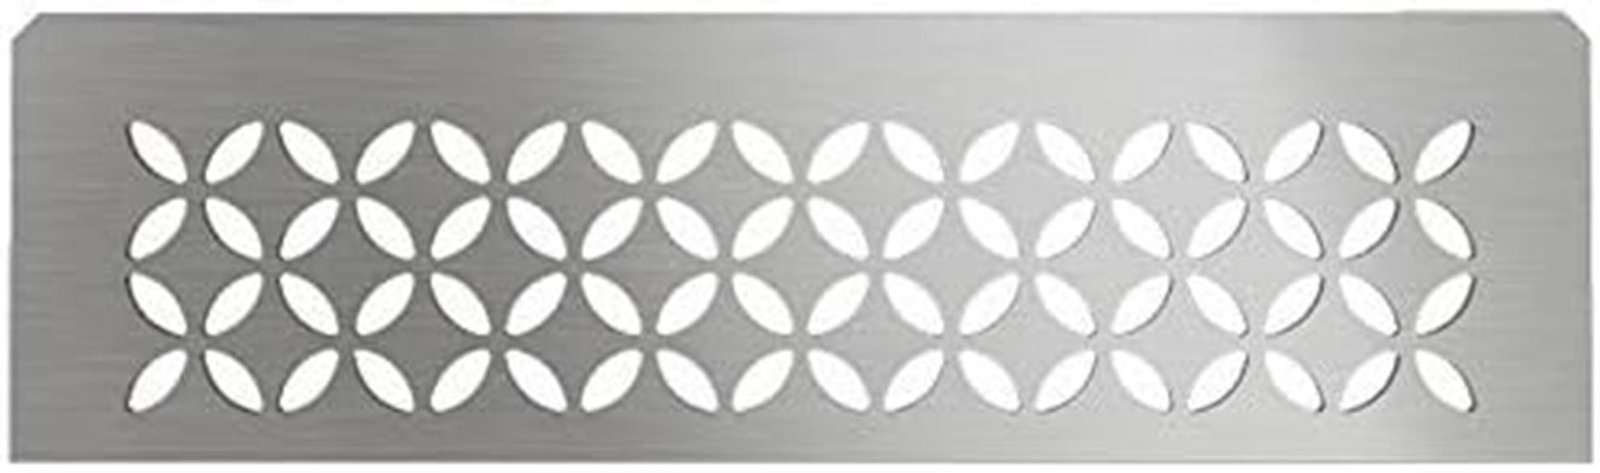 floral stainless steel shower shelf